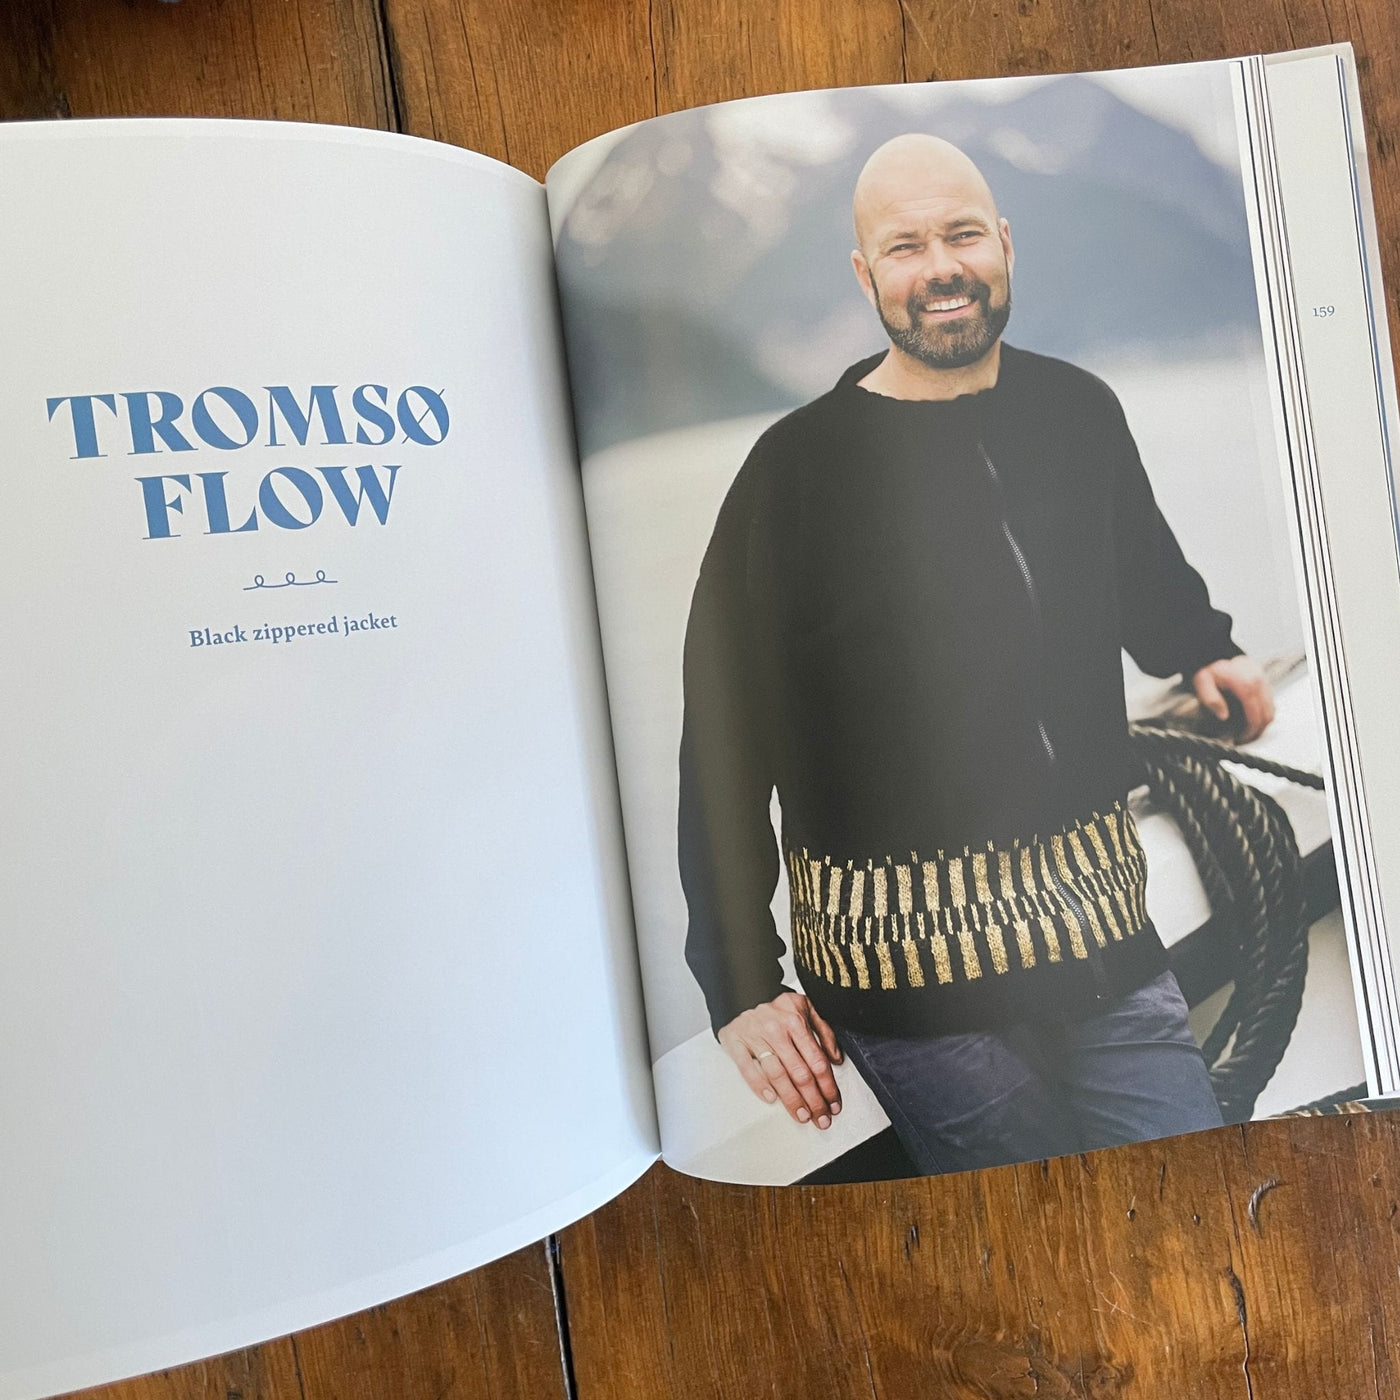 Fishermen's Knits from the Coast of Norway [Book]